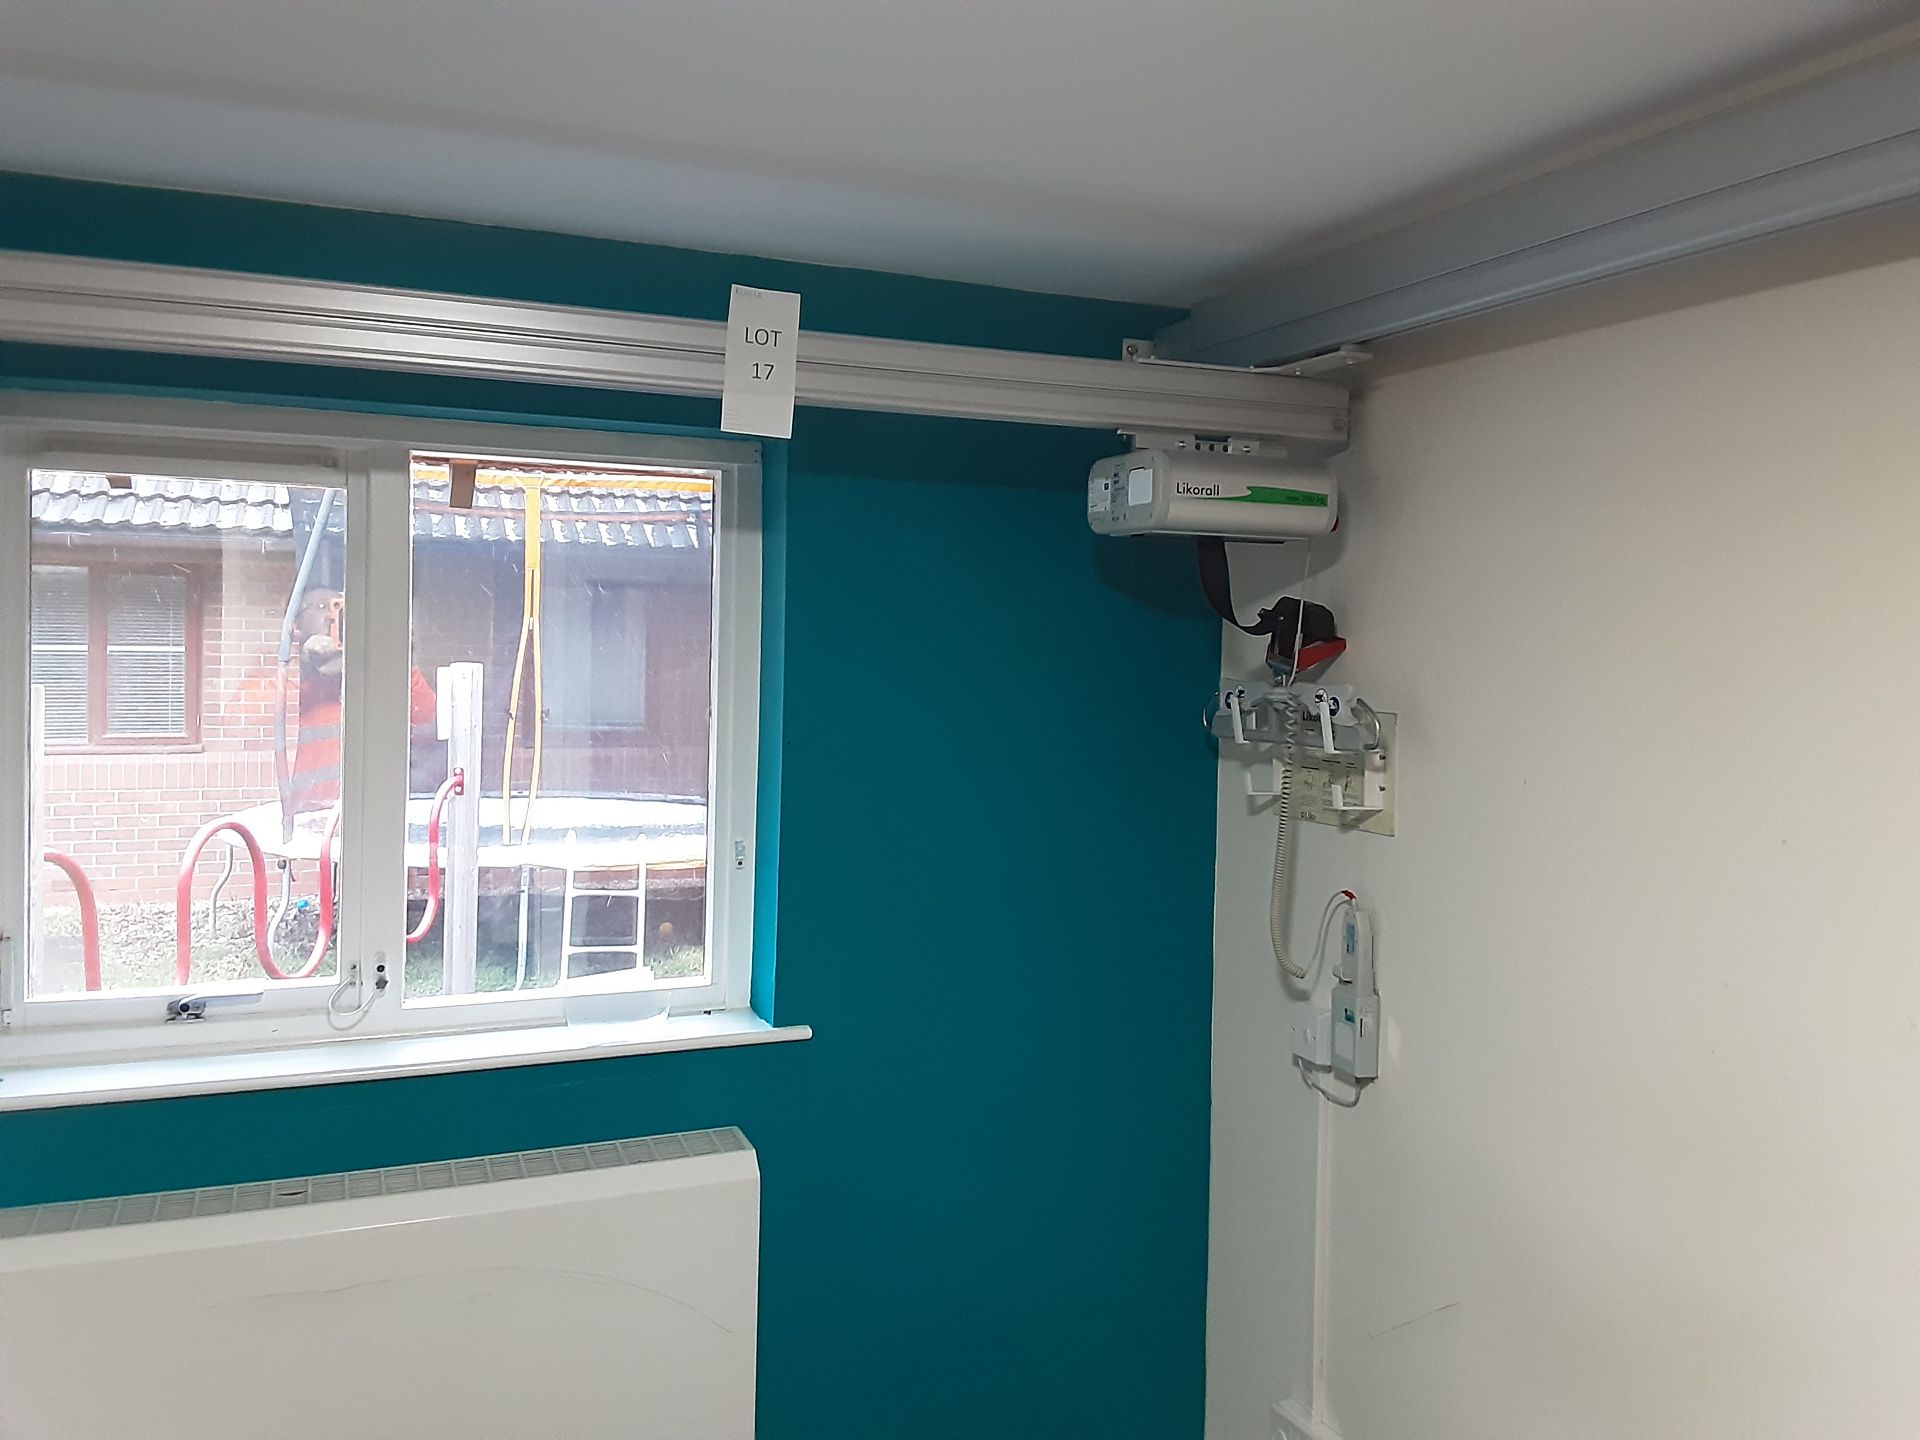 Likorall 242S 200kg Patient Lift with KwikTrak Ceiling Rail System Serial No: 262071